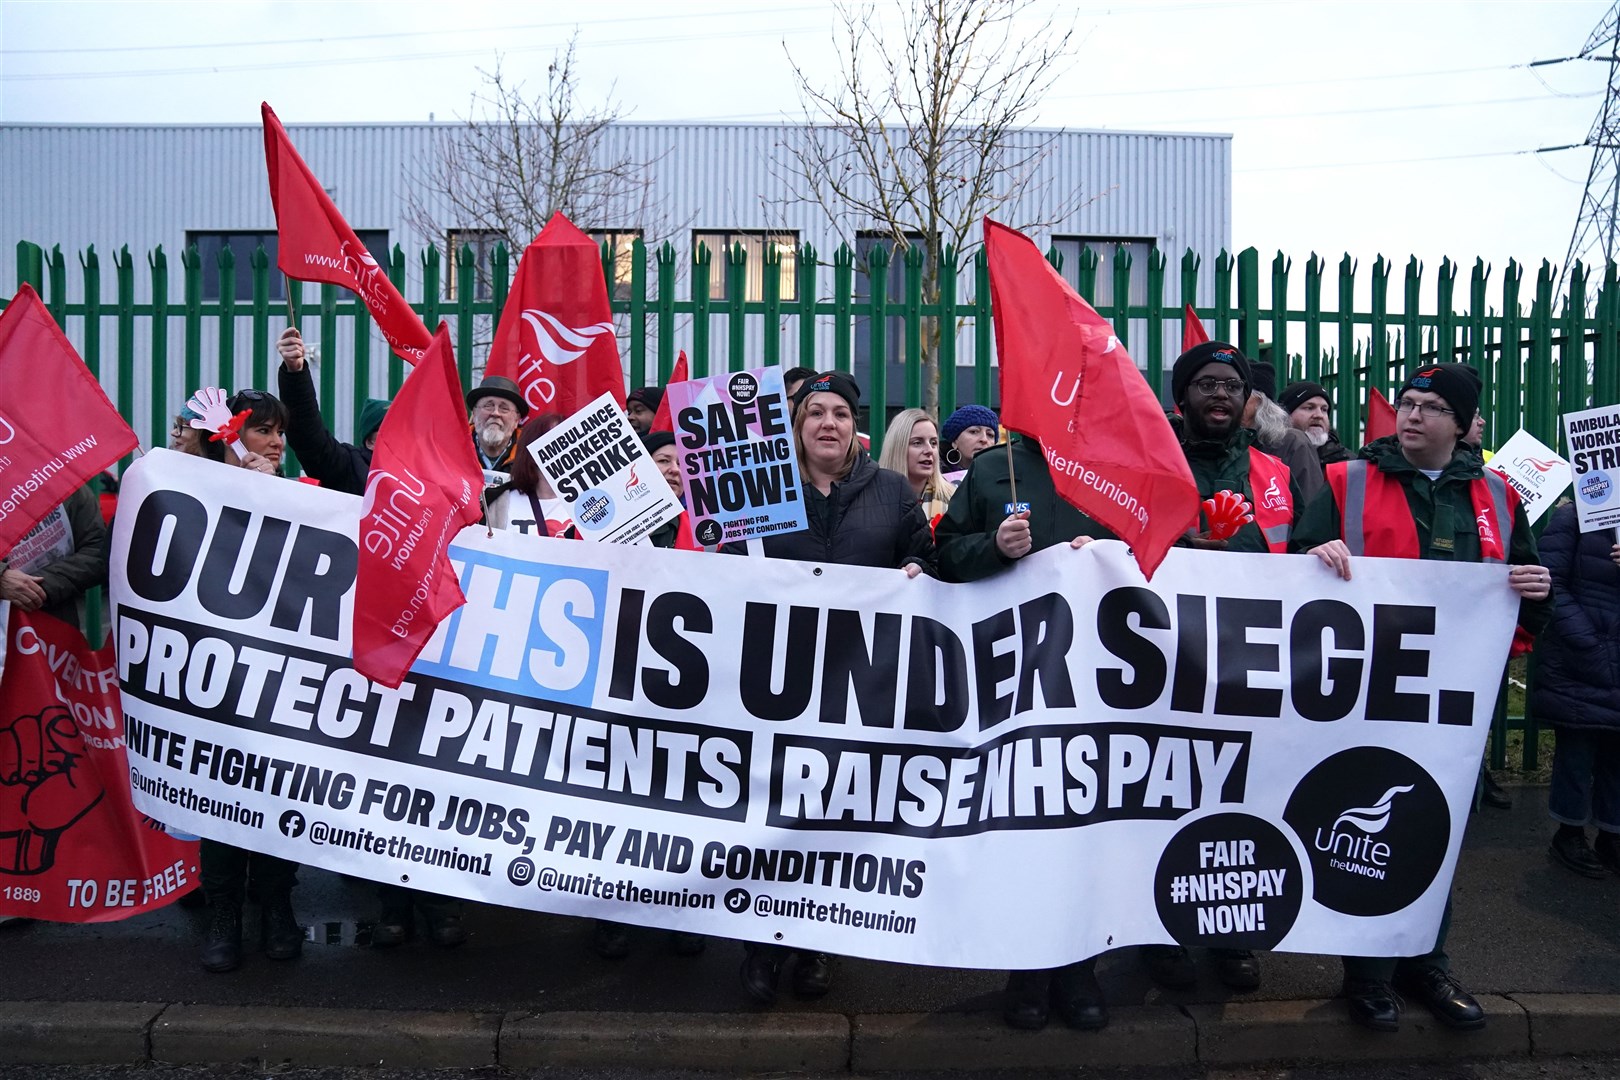 Ambulance workers from the Unite trade union are planning industrial action in the new year (Jacob King/PA)